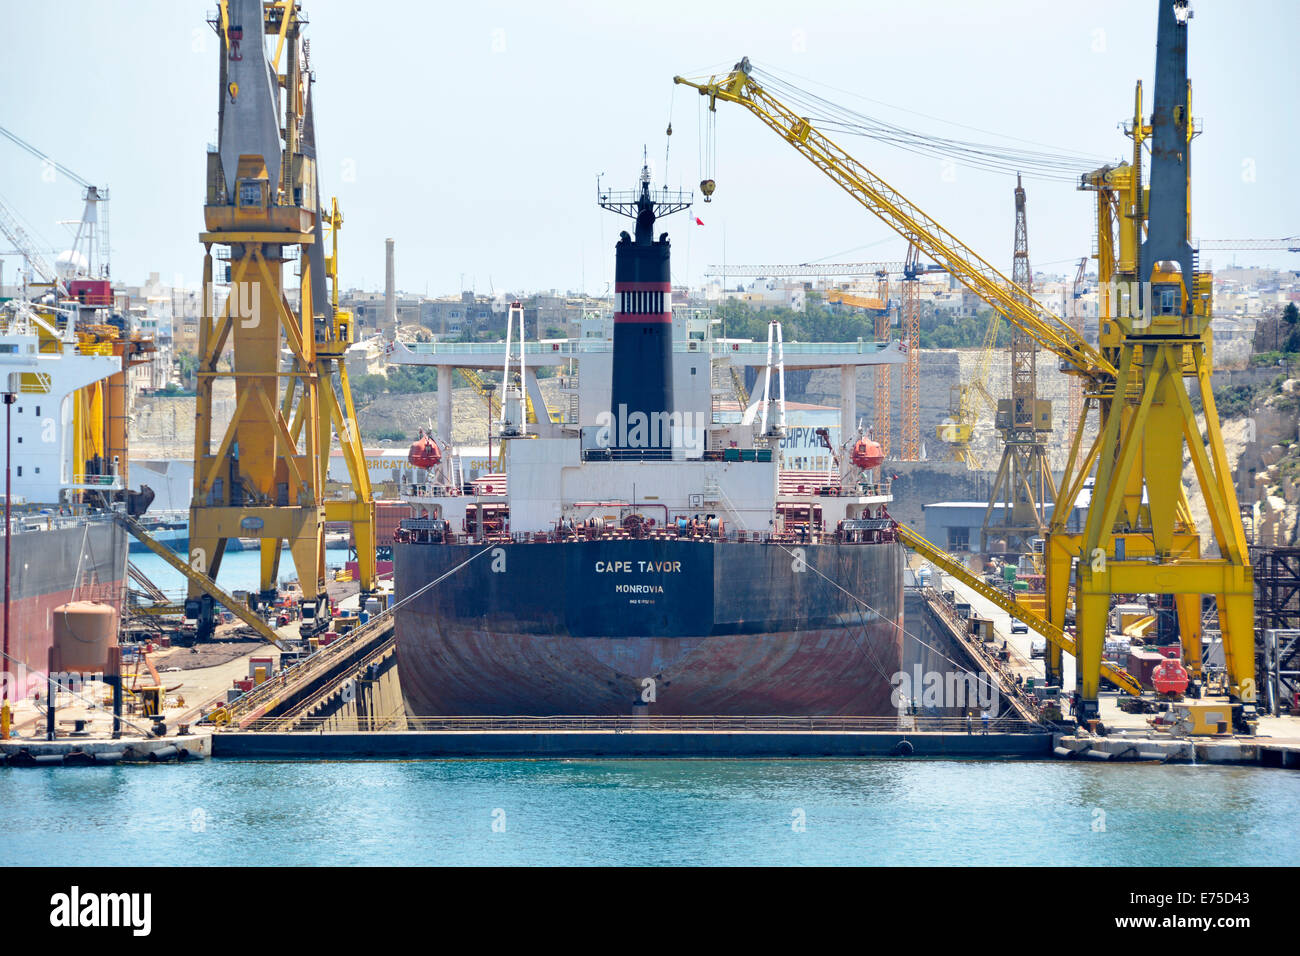 People at waters edge dwarfed by close up stern of Bulk carrier freighter Cape Tavor dry dock & shipyard cranes Grand Harbour Port Valletta Malta EU Stock Photo